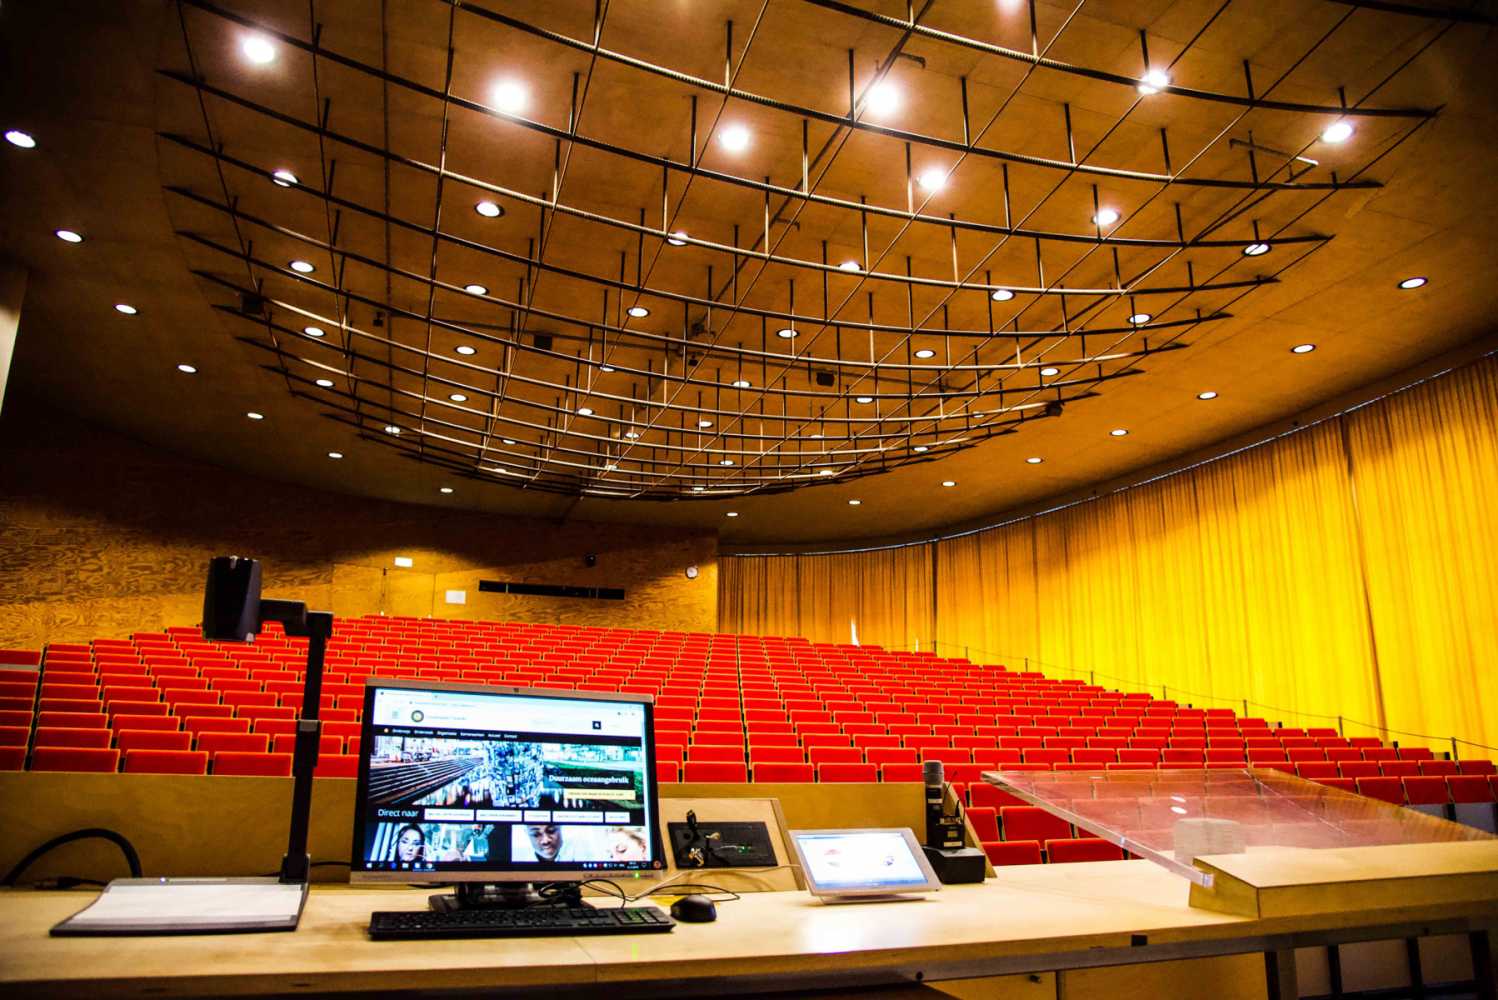 Utrecht University was the setting for a three-year audio installation of Shure equipment